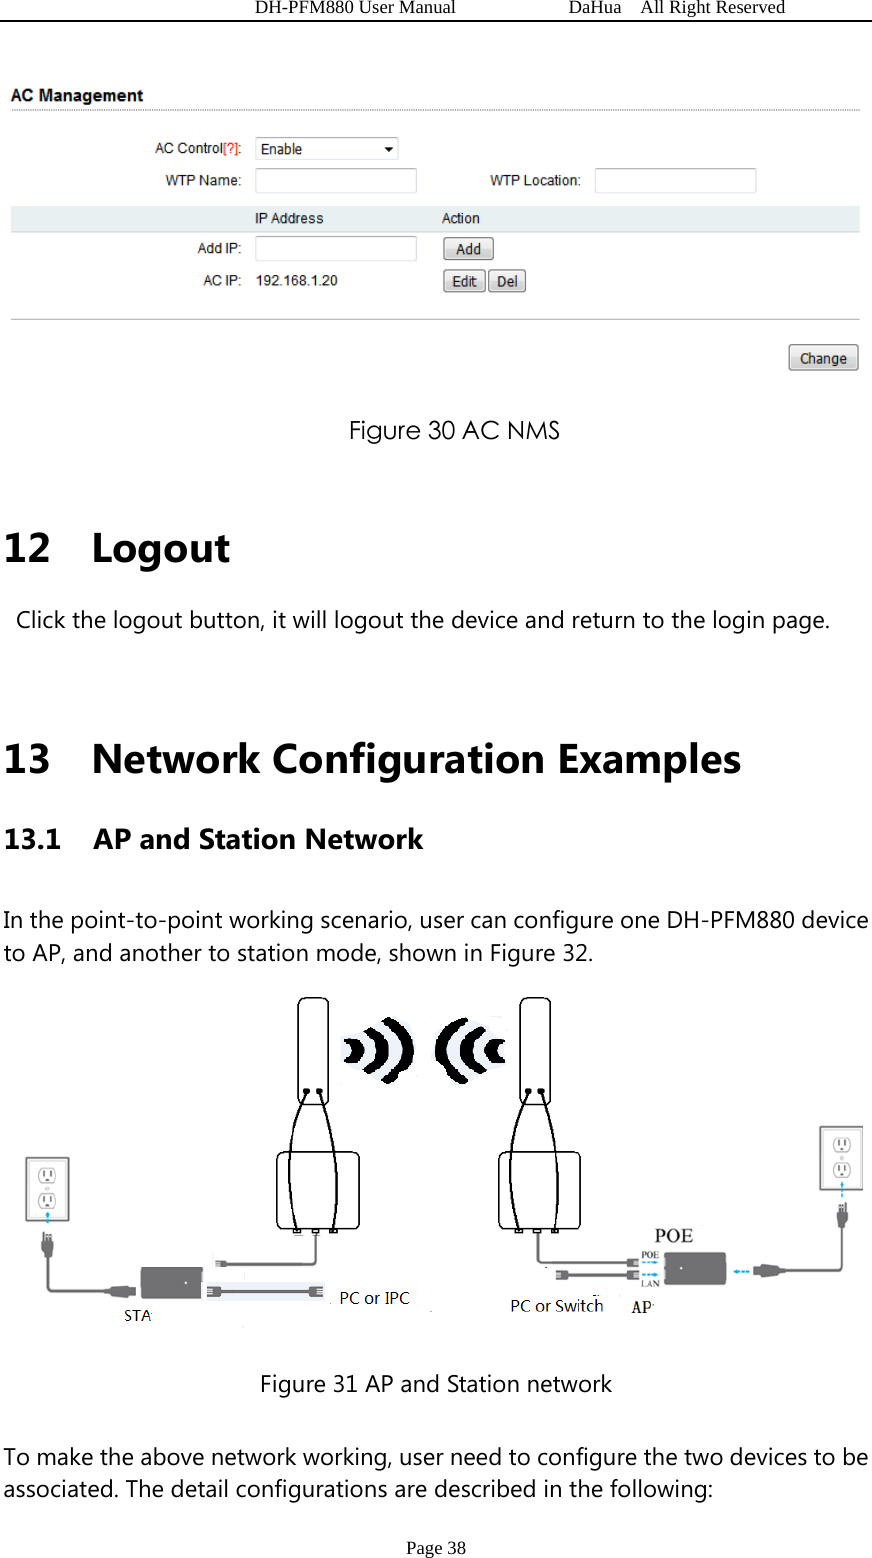   DH-PFM880 User Manual            DaHua  All Right Reserved Page 38  Figure 30 AC NMS  12 Logout  Click the logout button, it will logout the device and return to the login page.  13 Network Configuration Examples 13.1   AP and Station Network In the point-to-point working scenario, user can configure one DH-PFM880 device to AP, and another to station mode, shown in Figure 32.    Figure 31 AP and Station network To make the above network working, user need to configure the two devices to be associated. The detail configurations are described in the following: 